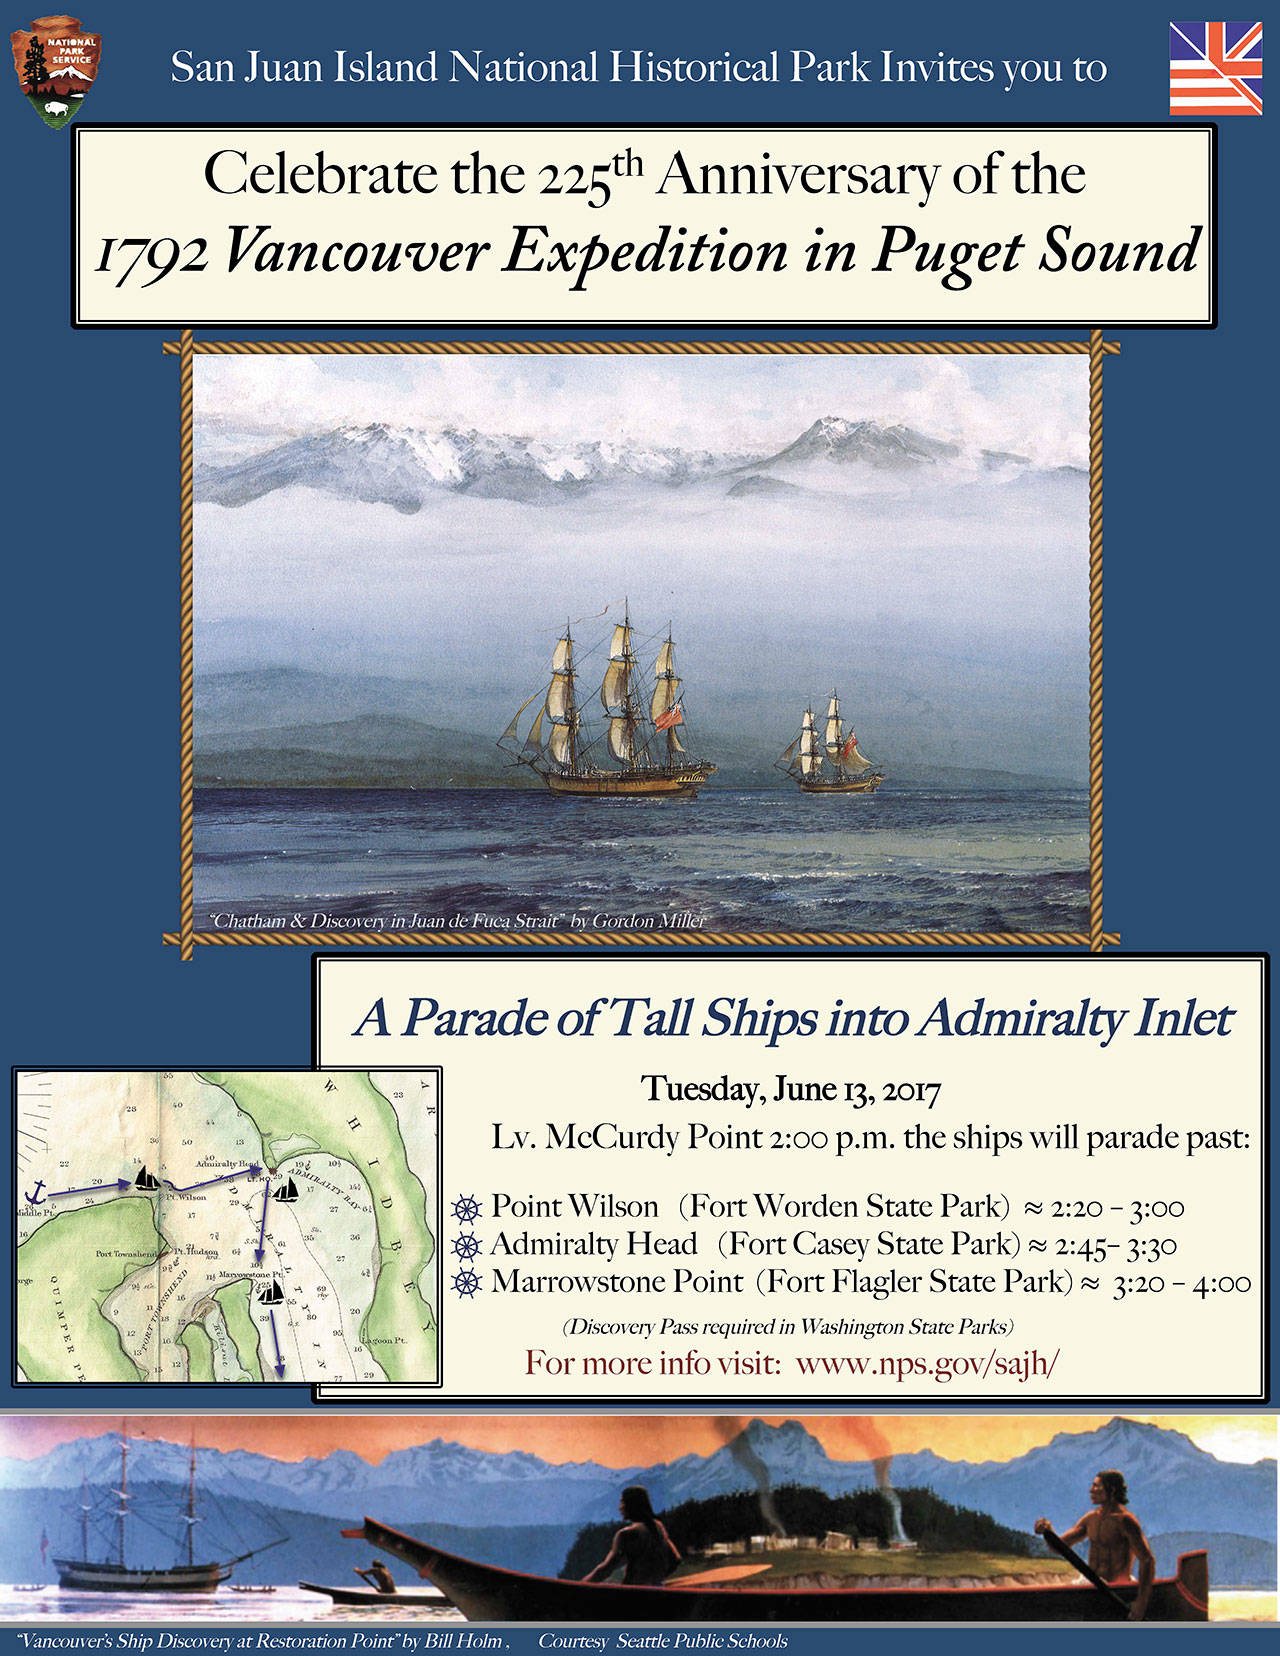 Parade of sail boats celebrates 1792 Vancouver expedition in Puget Sound